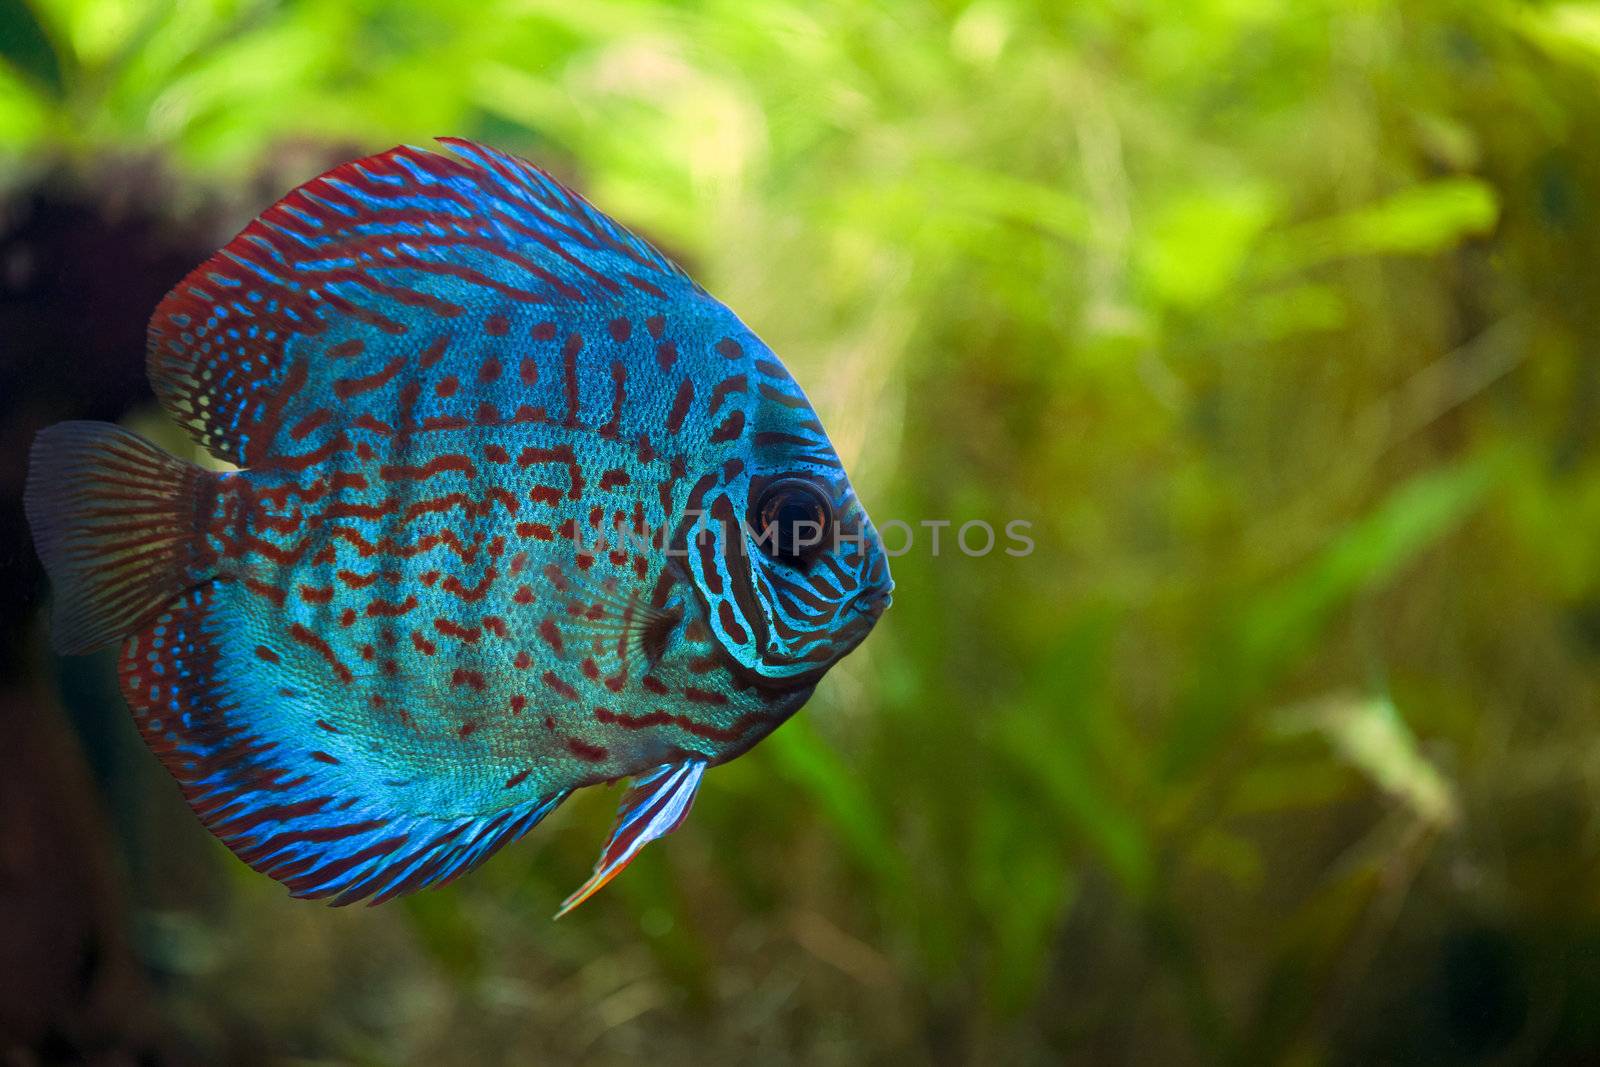 A colorful close up shot of a Discus Fish